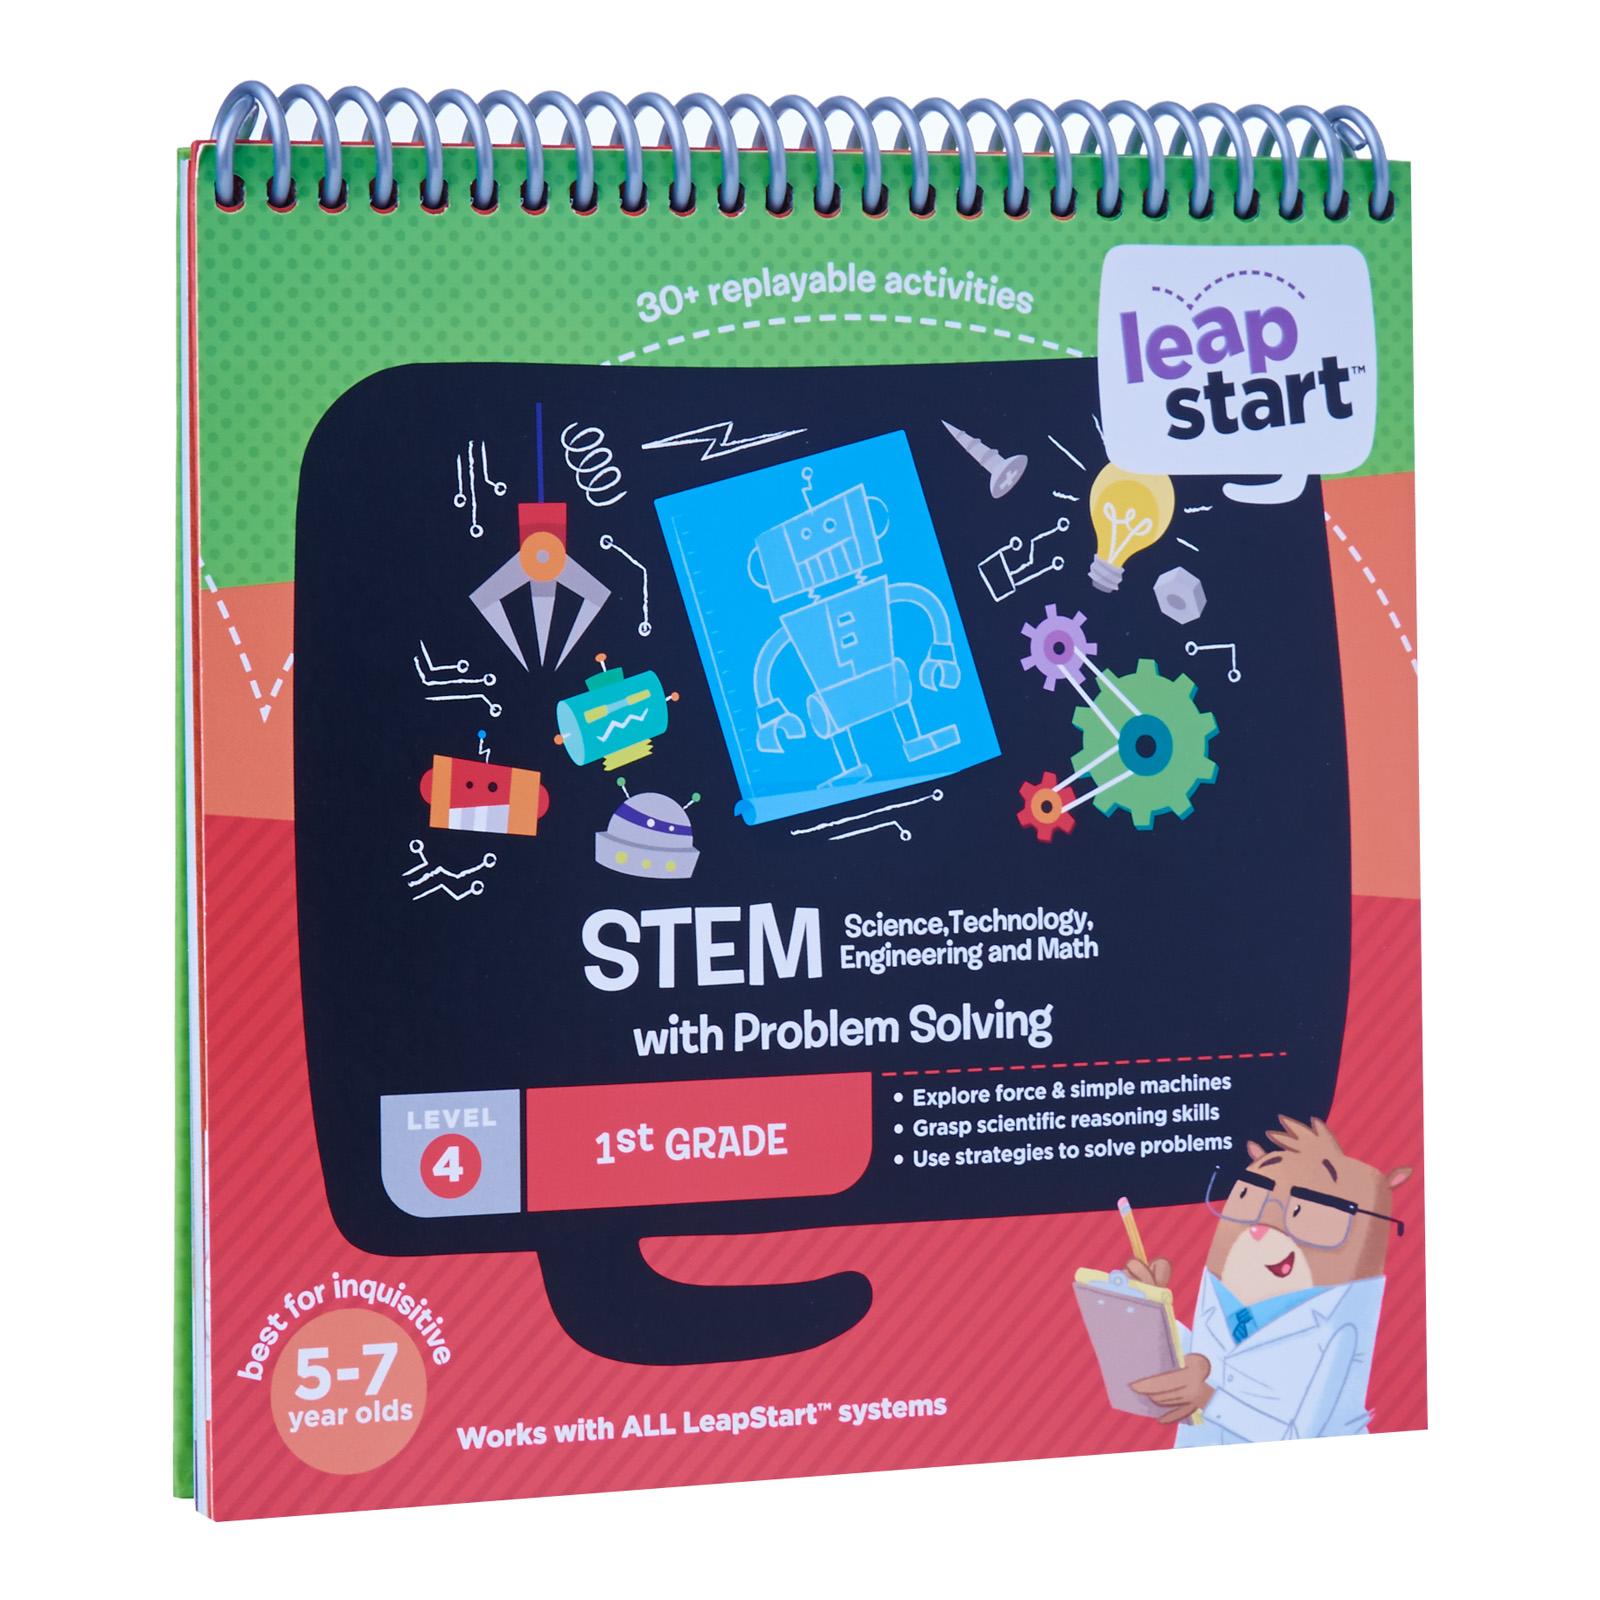 LeapStart™ STEM (Science, Technology, Engineering and Math) with Problem Solving 30+ Page Activity Book-Overview